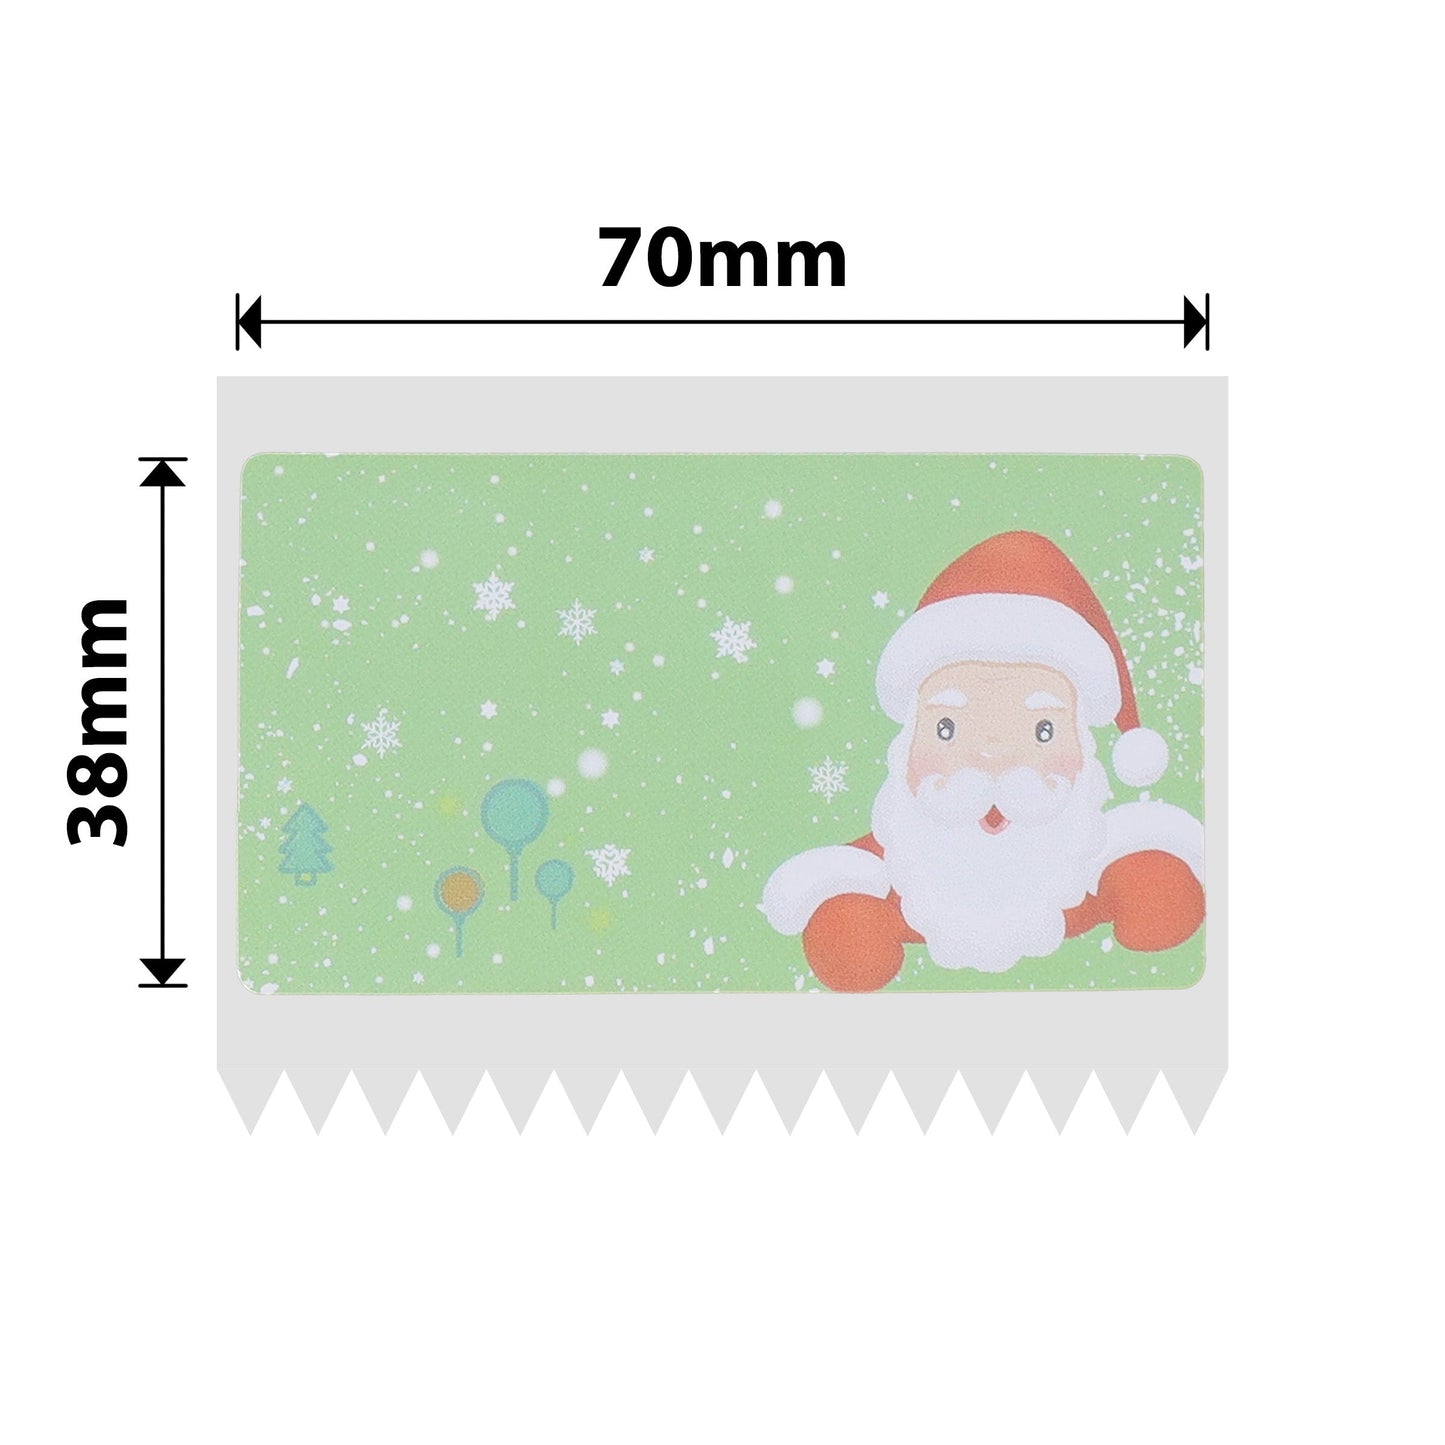 NIIMBOT - B3S ONLY - T70*38MM - 180 LABELS PER ROLL - CHRISTMAS